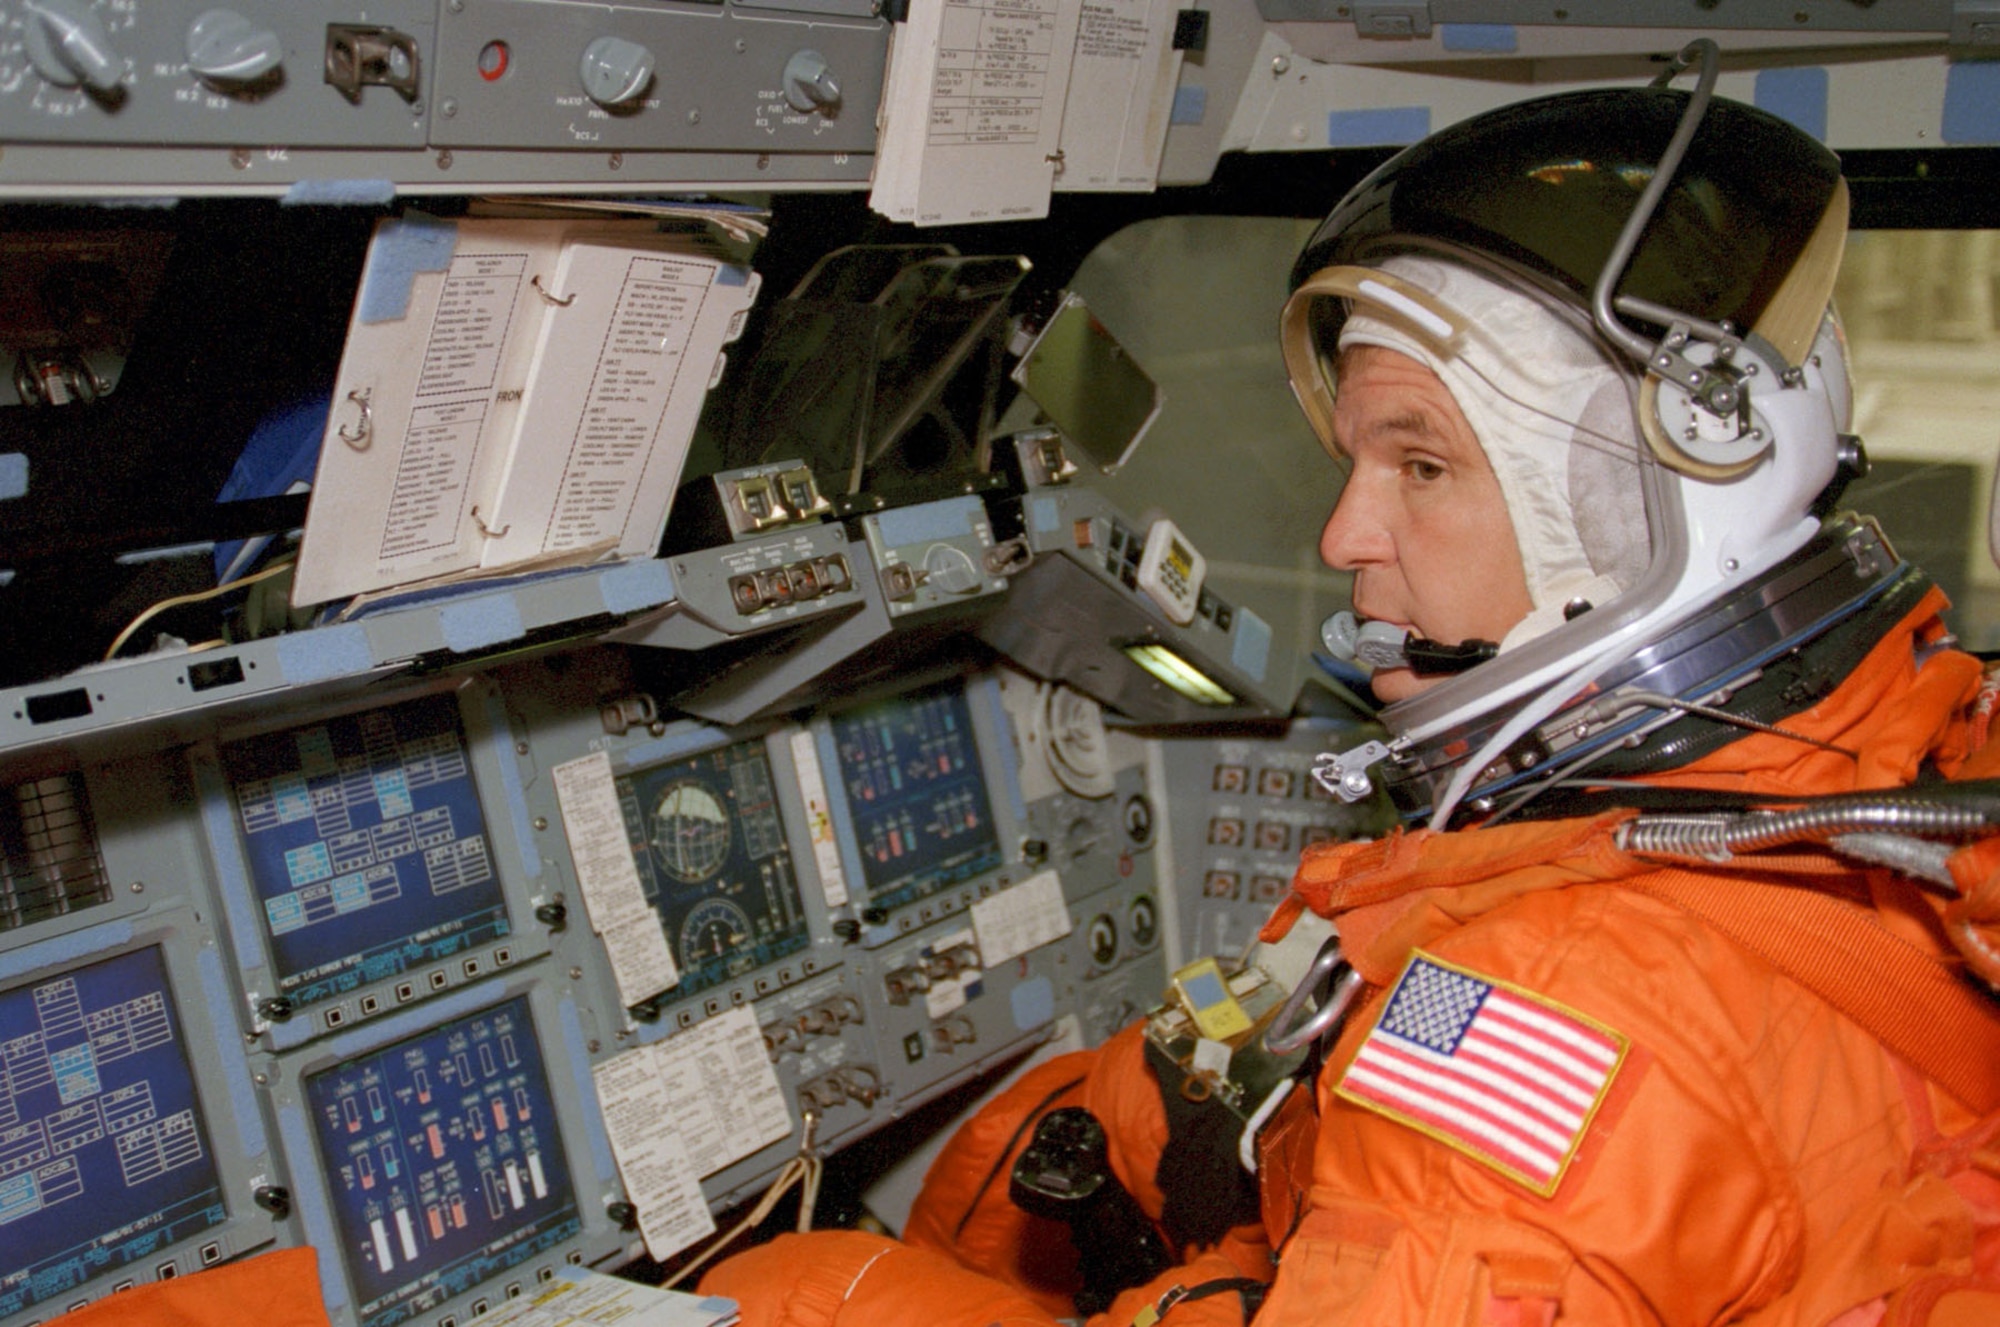 Astronaut Michael J. Bloomfield, STS-97 pilot, mans the pilot's station of a Crew Compartment Trainer in July 1999 during a training exercise at Johnson Space Center's Systems Integration Facility. (NASA photo)